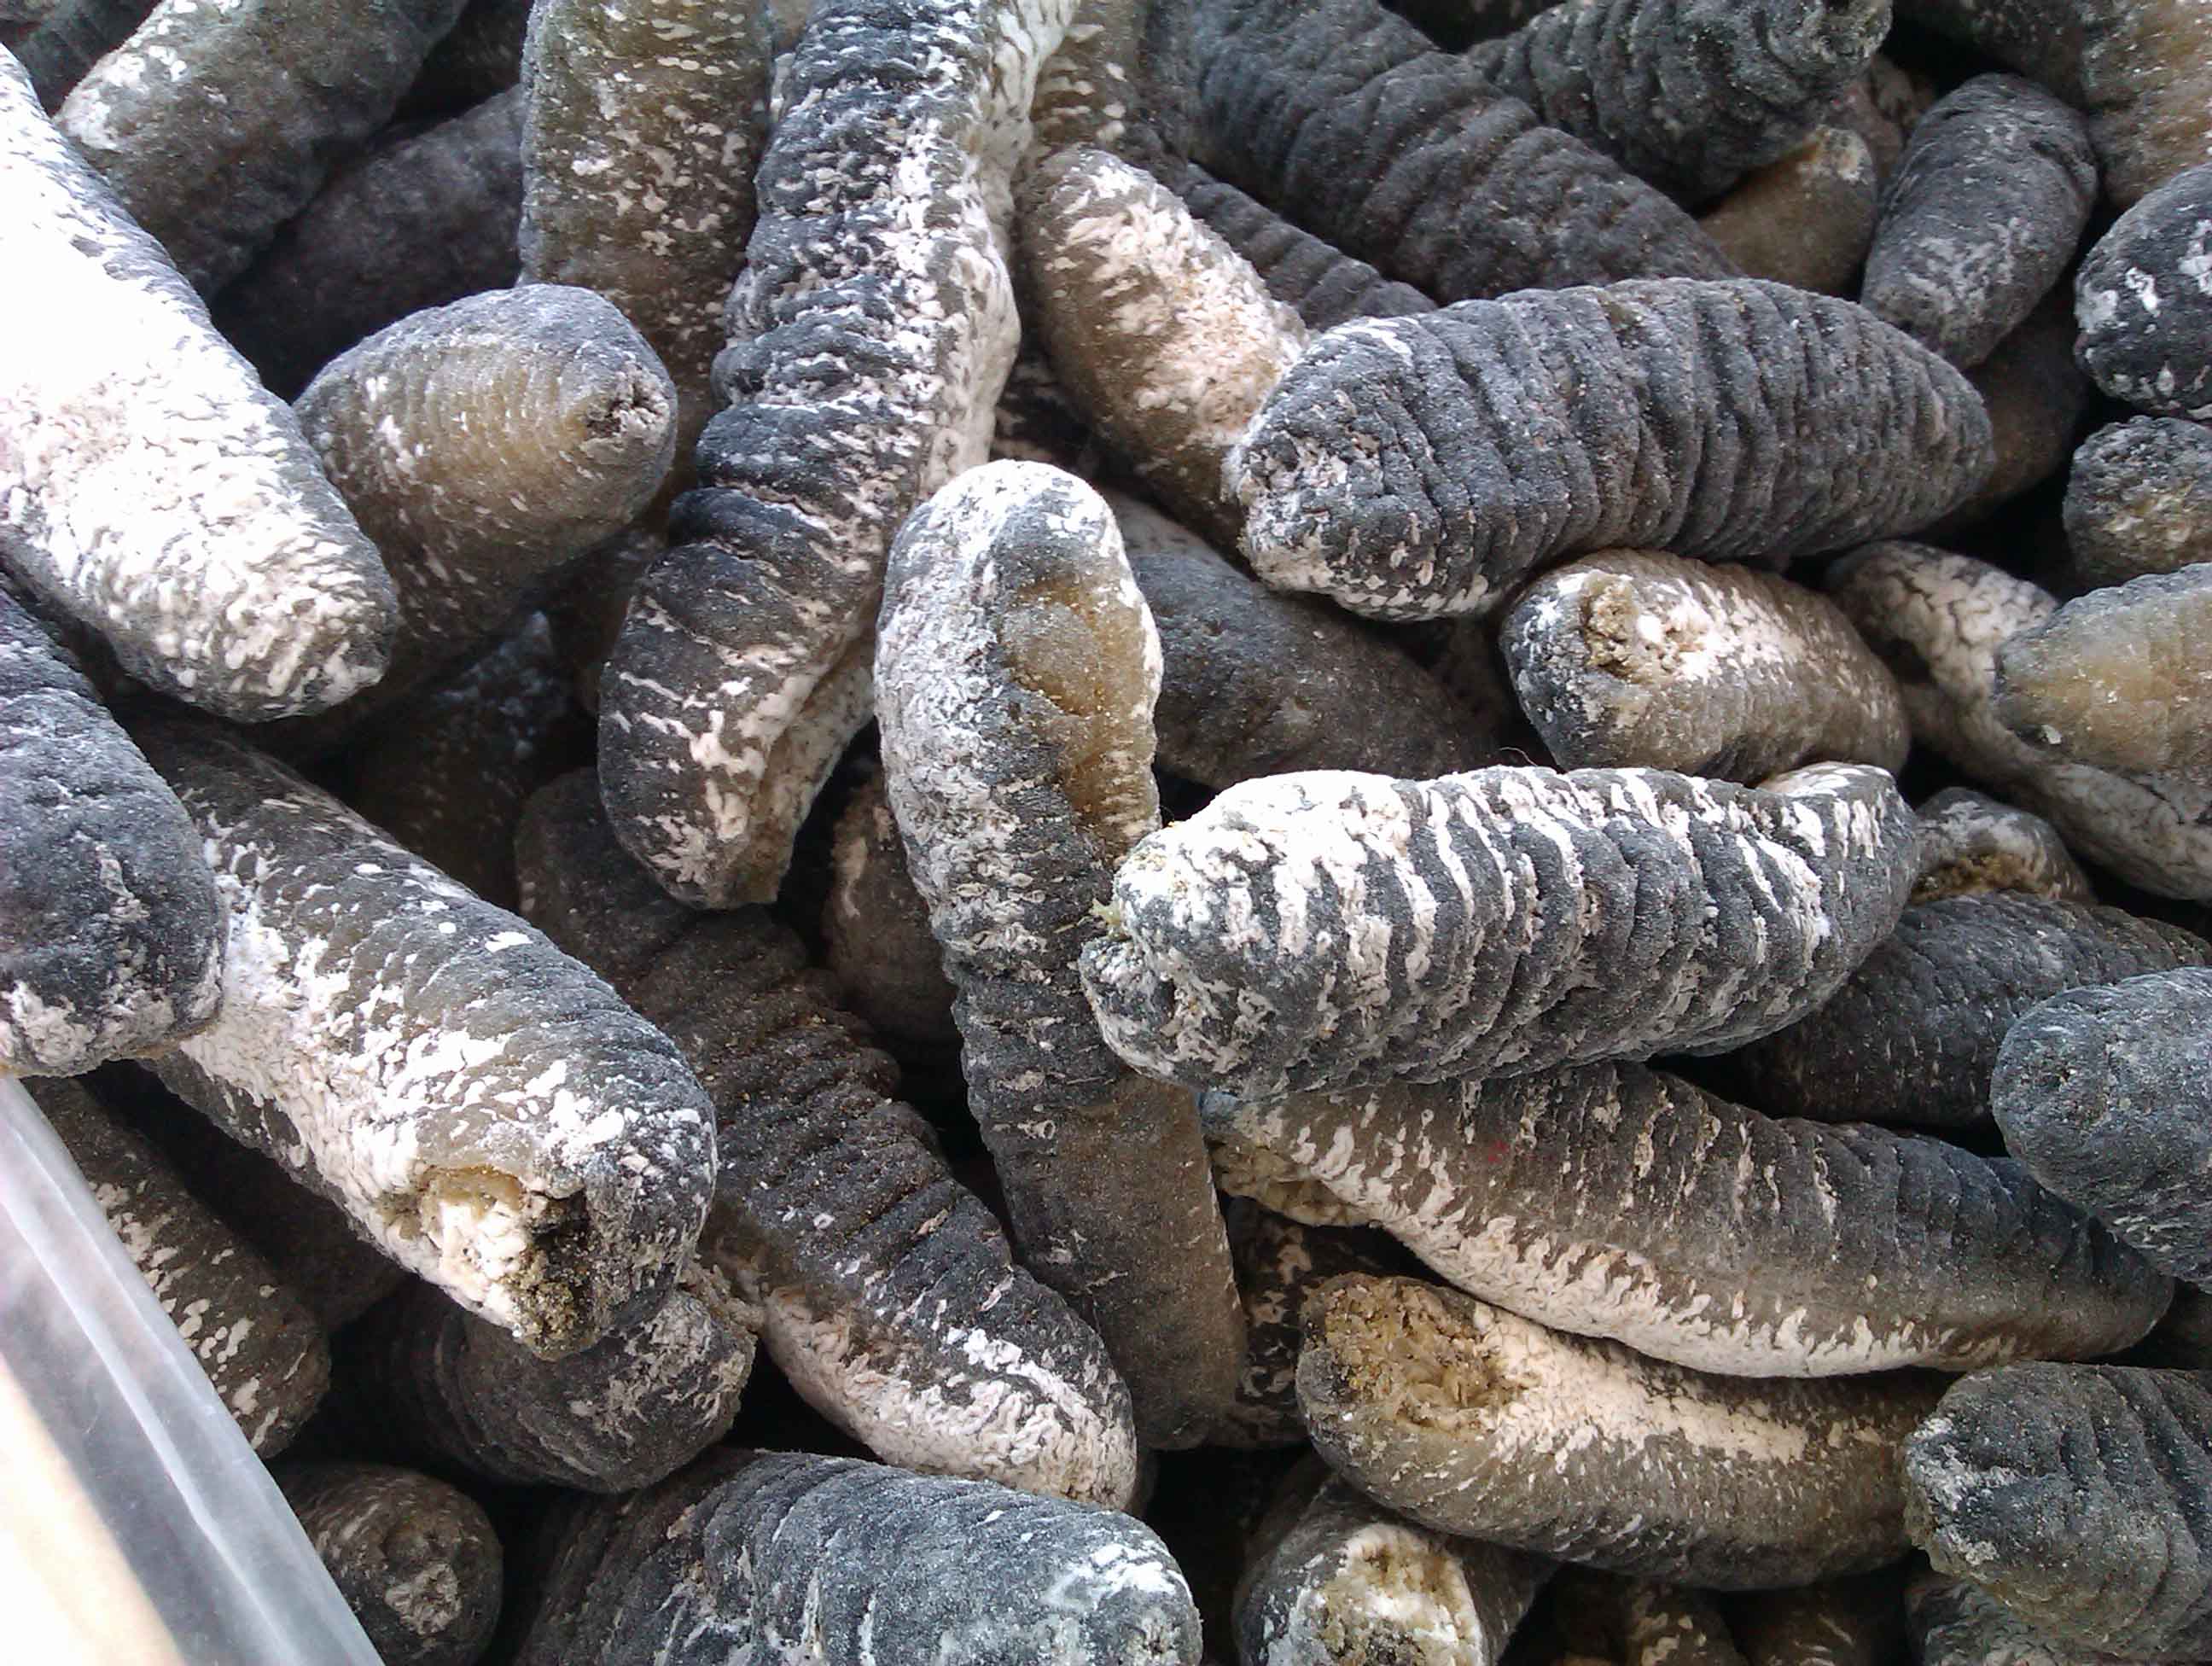 Dried and frozen Sea Cucumber